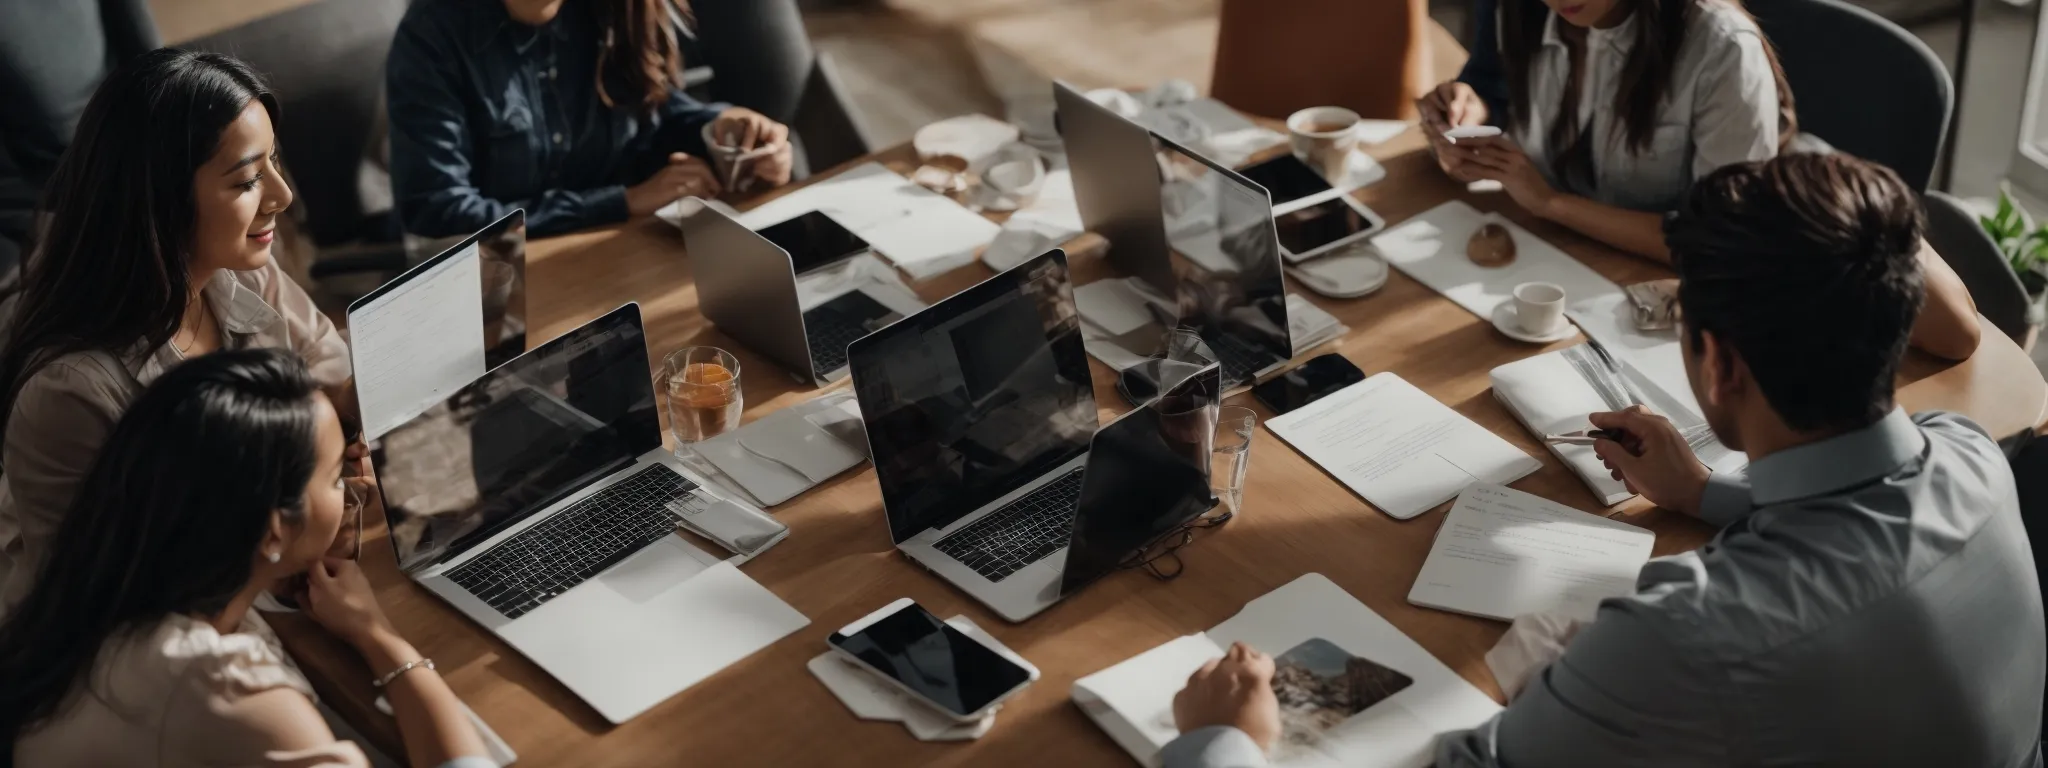 a digital marketing meeting with professionals discussing strategy around a table with laptops and notebooks, without any visible brands or text.